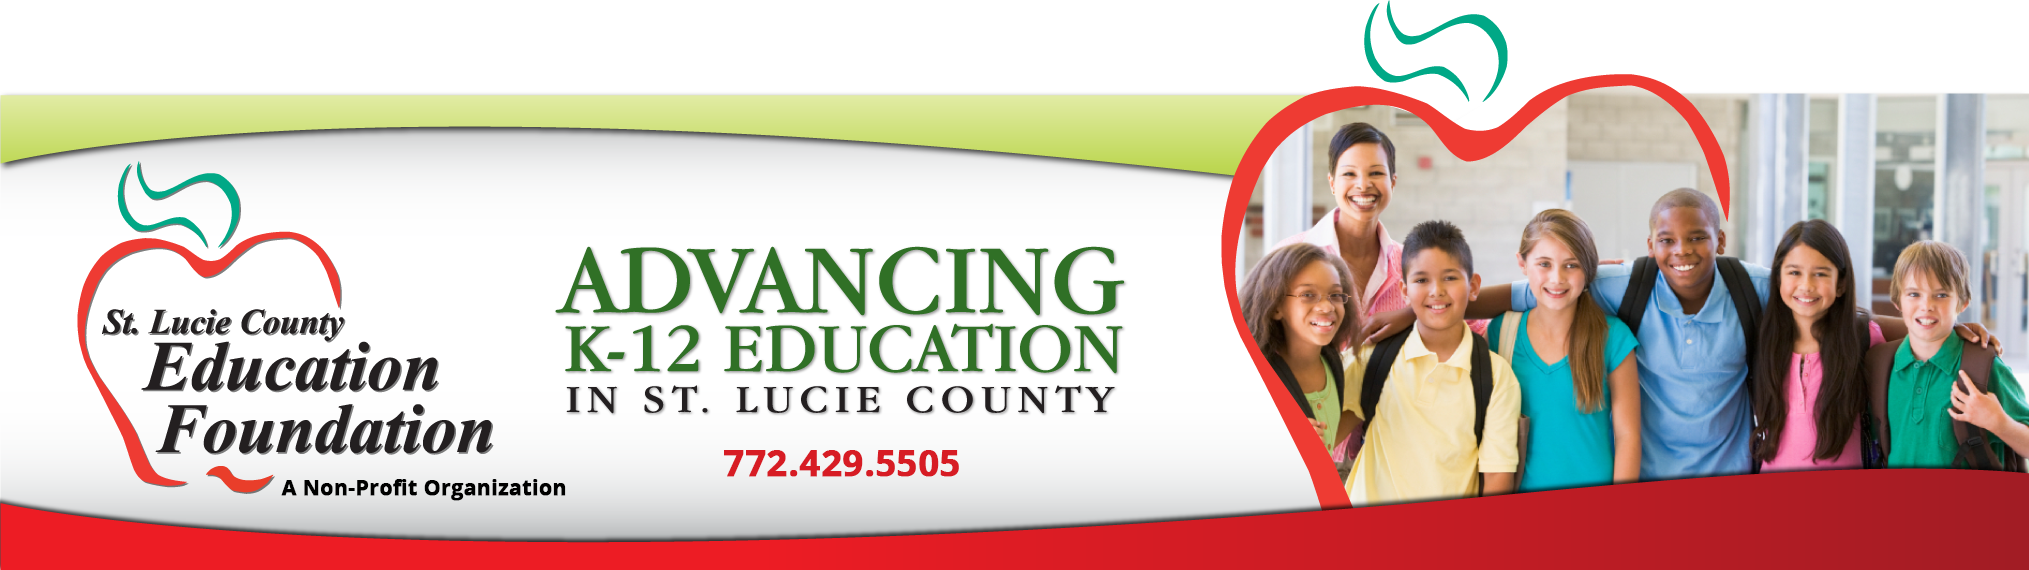 St. Lucie Education Foundation, Inc. - Home